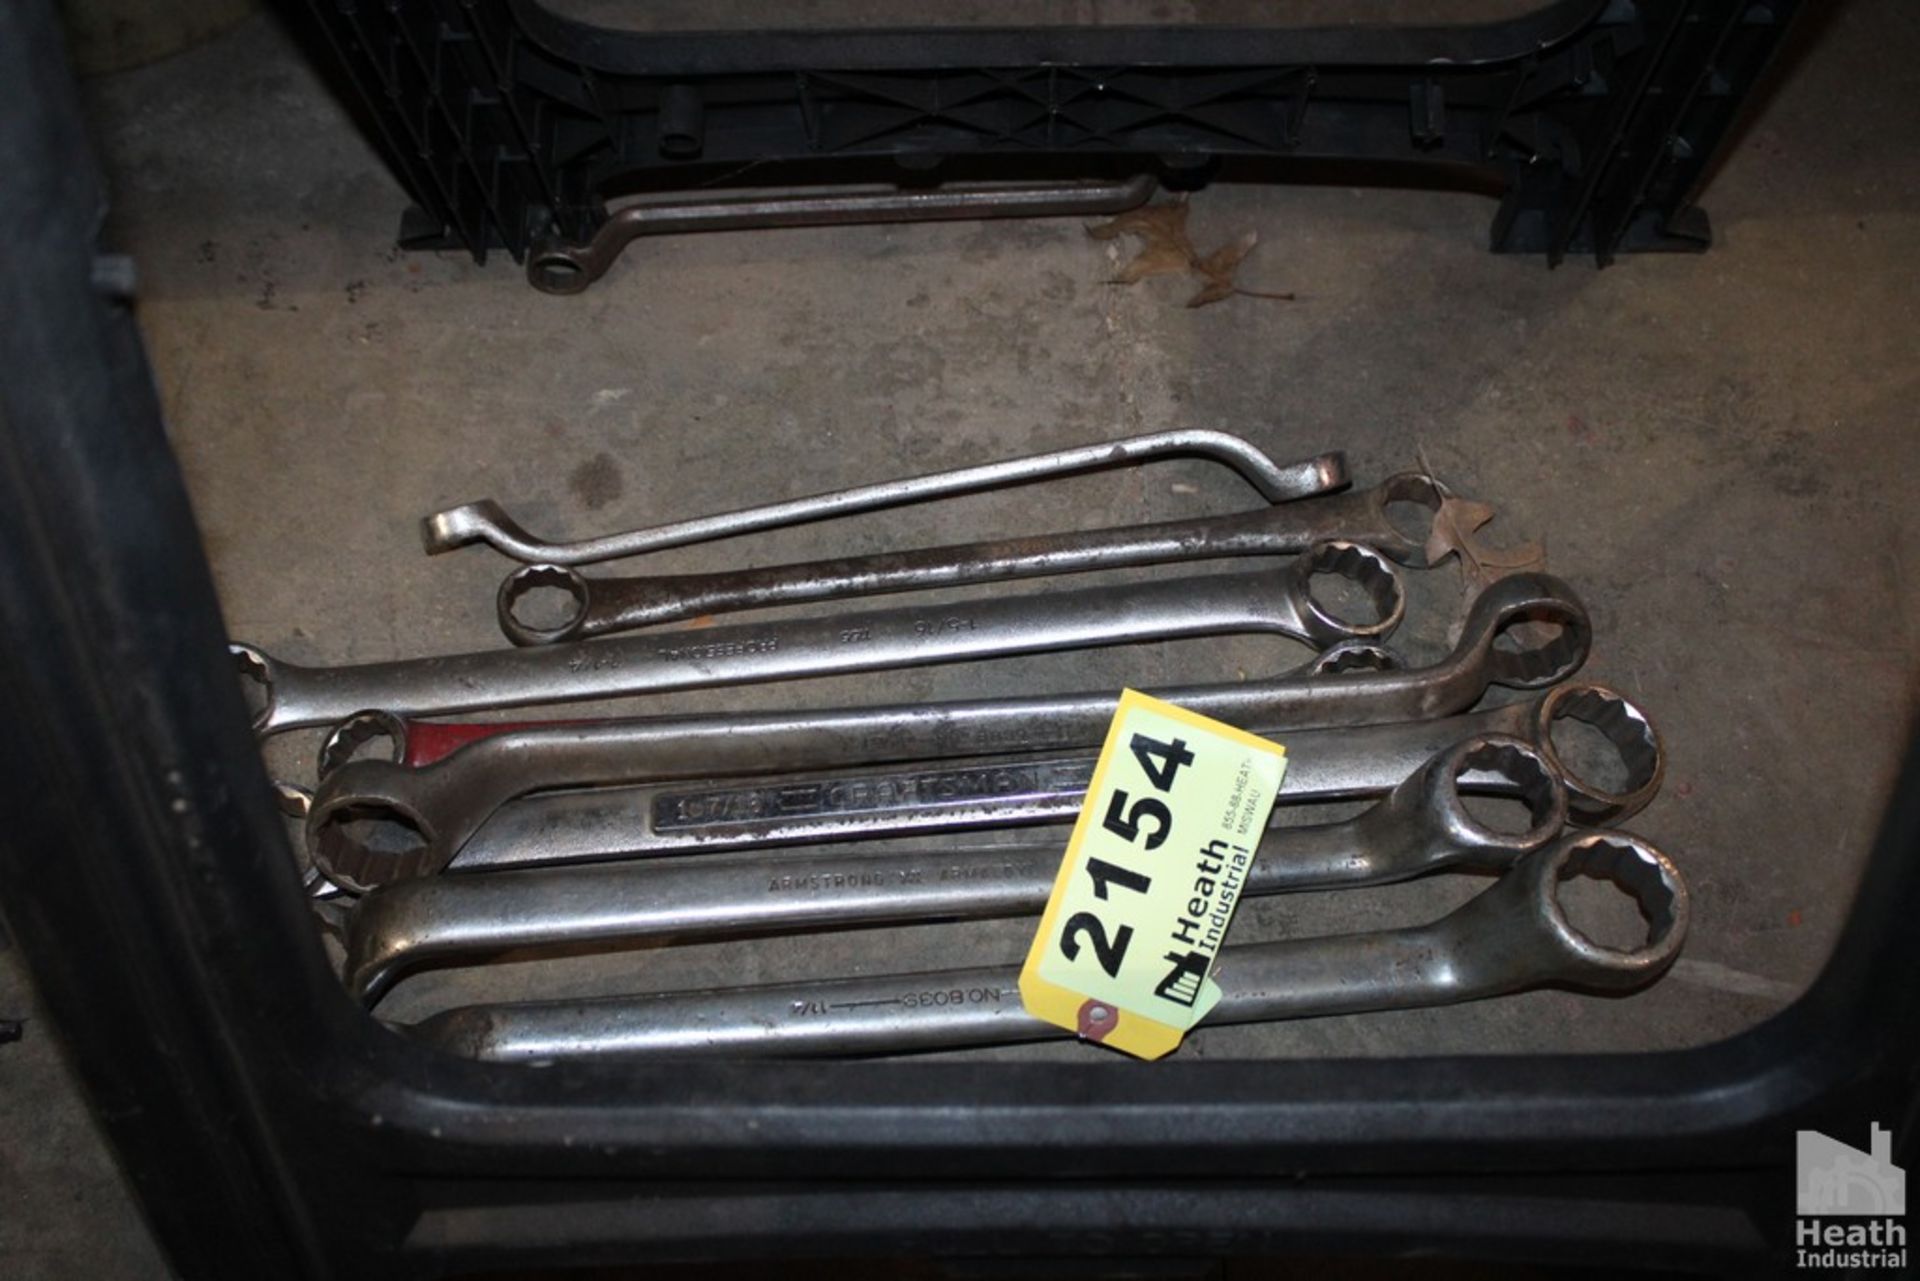 (9) LARGE BOX END WRENCHES